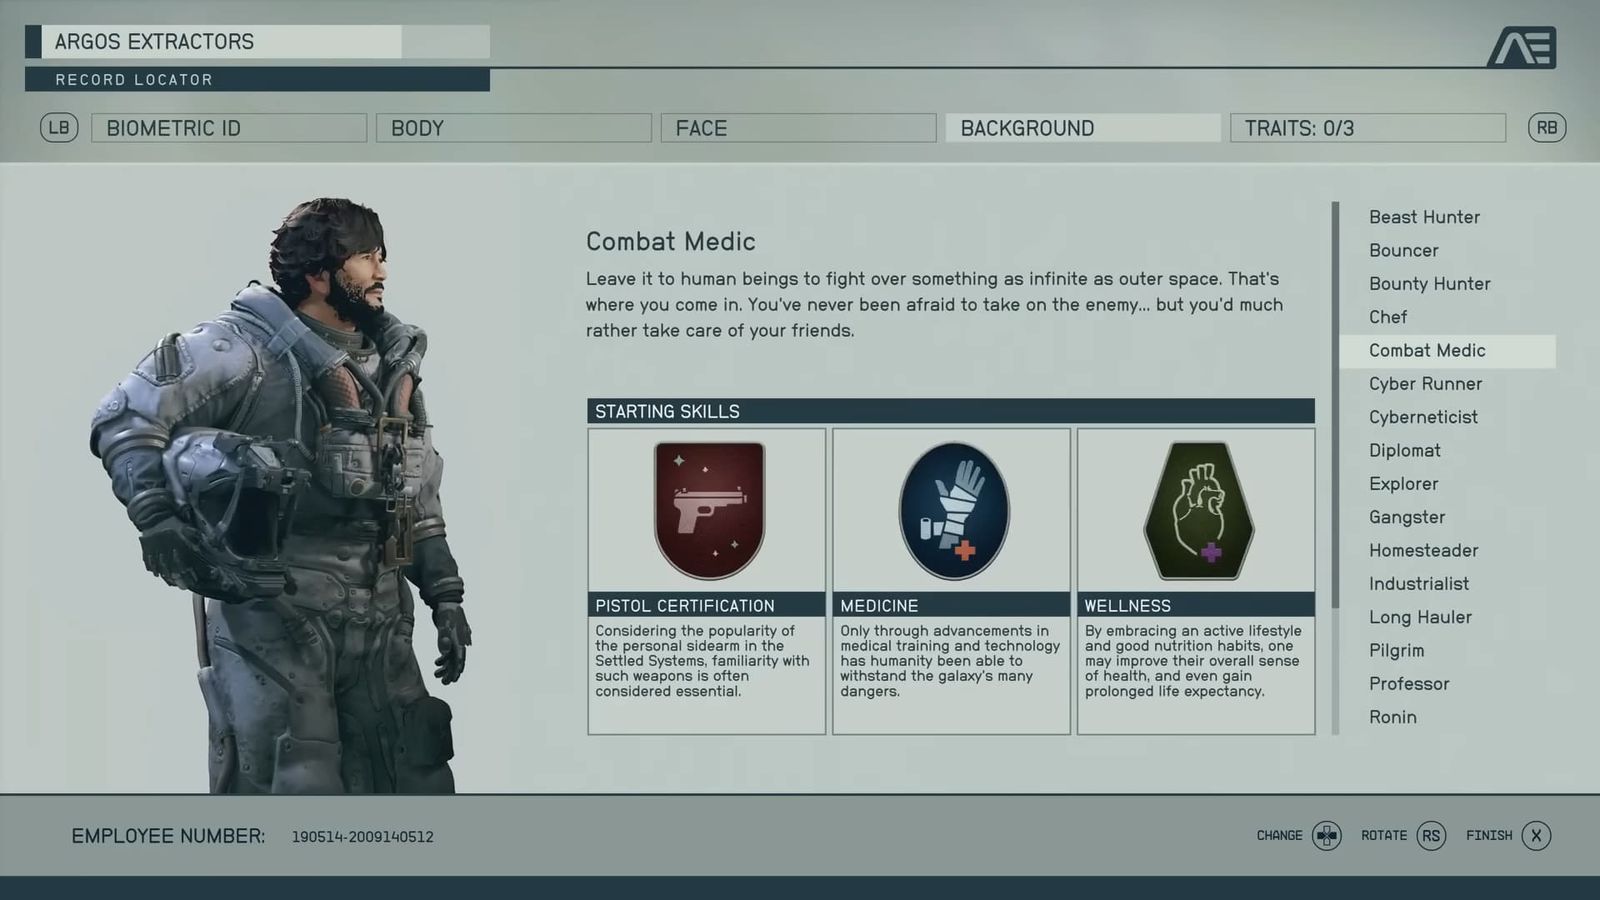 Combat medic info card is shown as a background option for your character